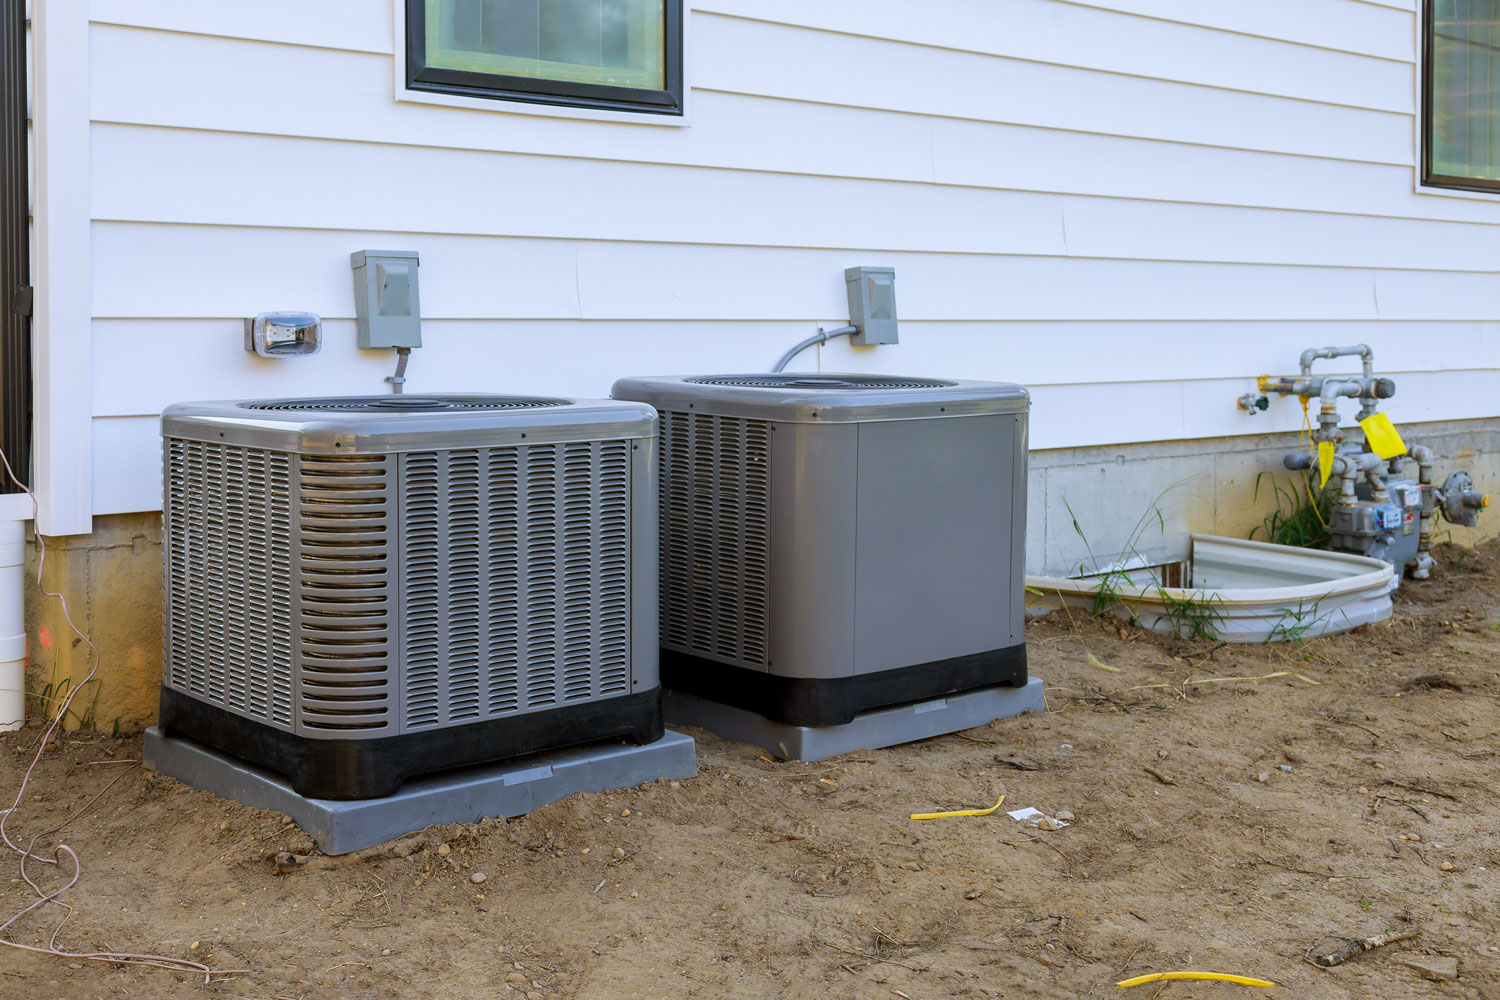 Small air conditioning units mounted on small concrete stands outside the house